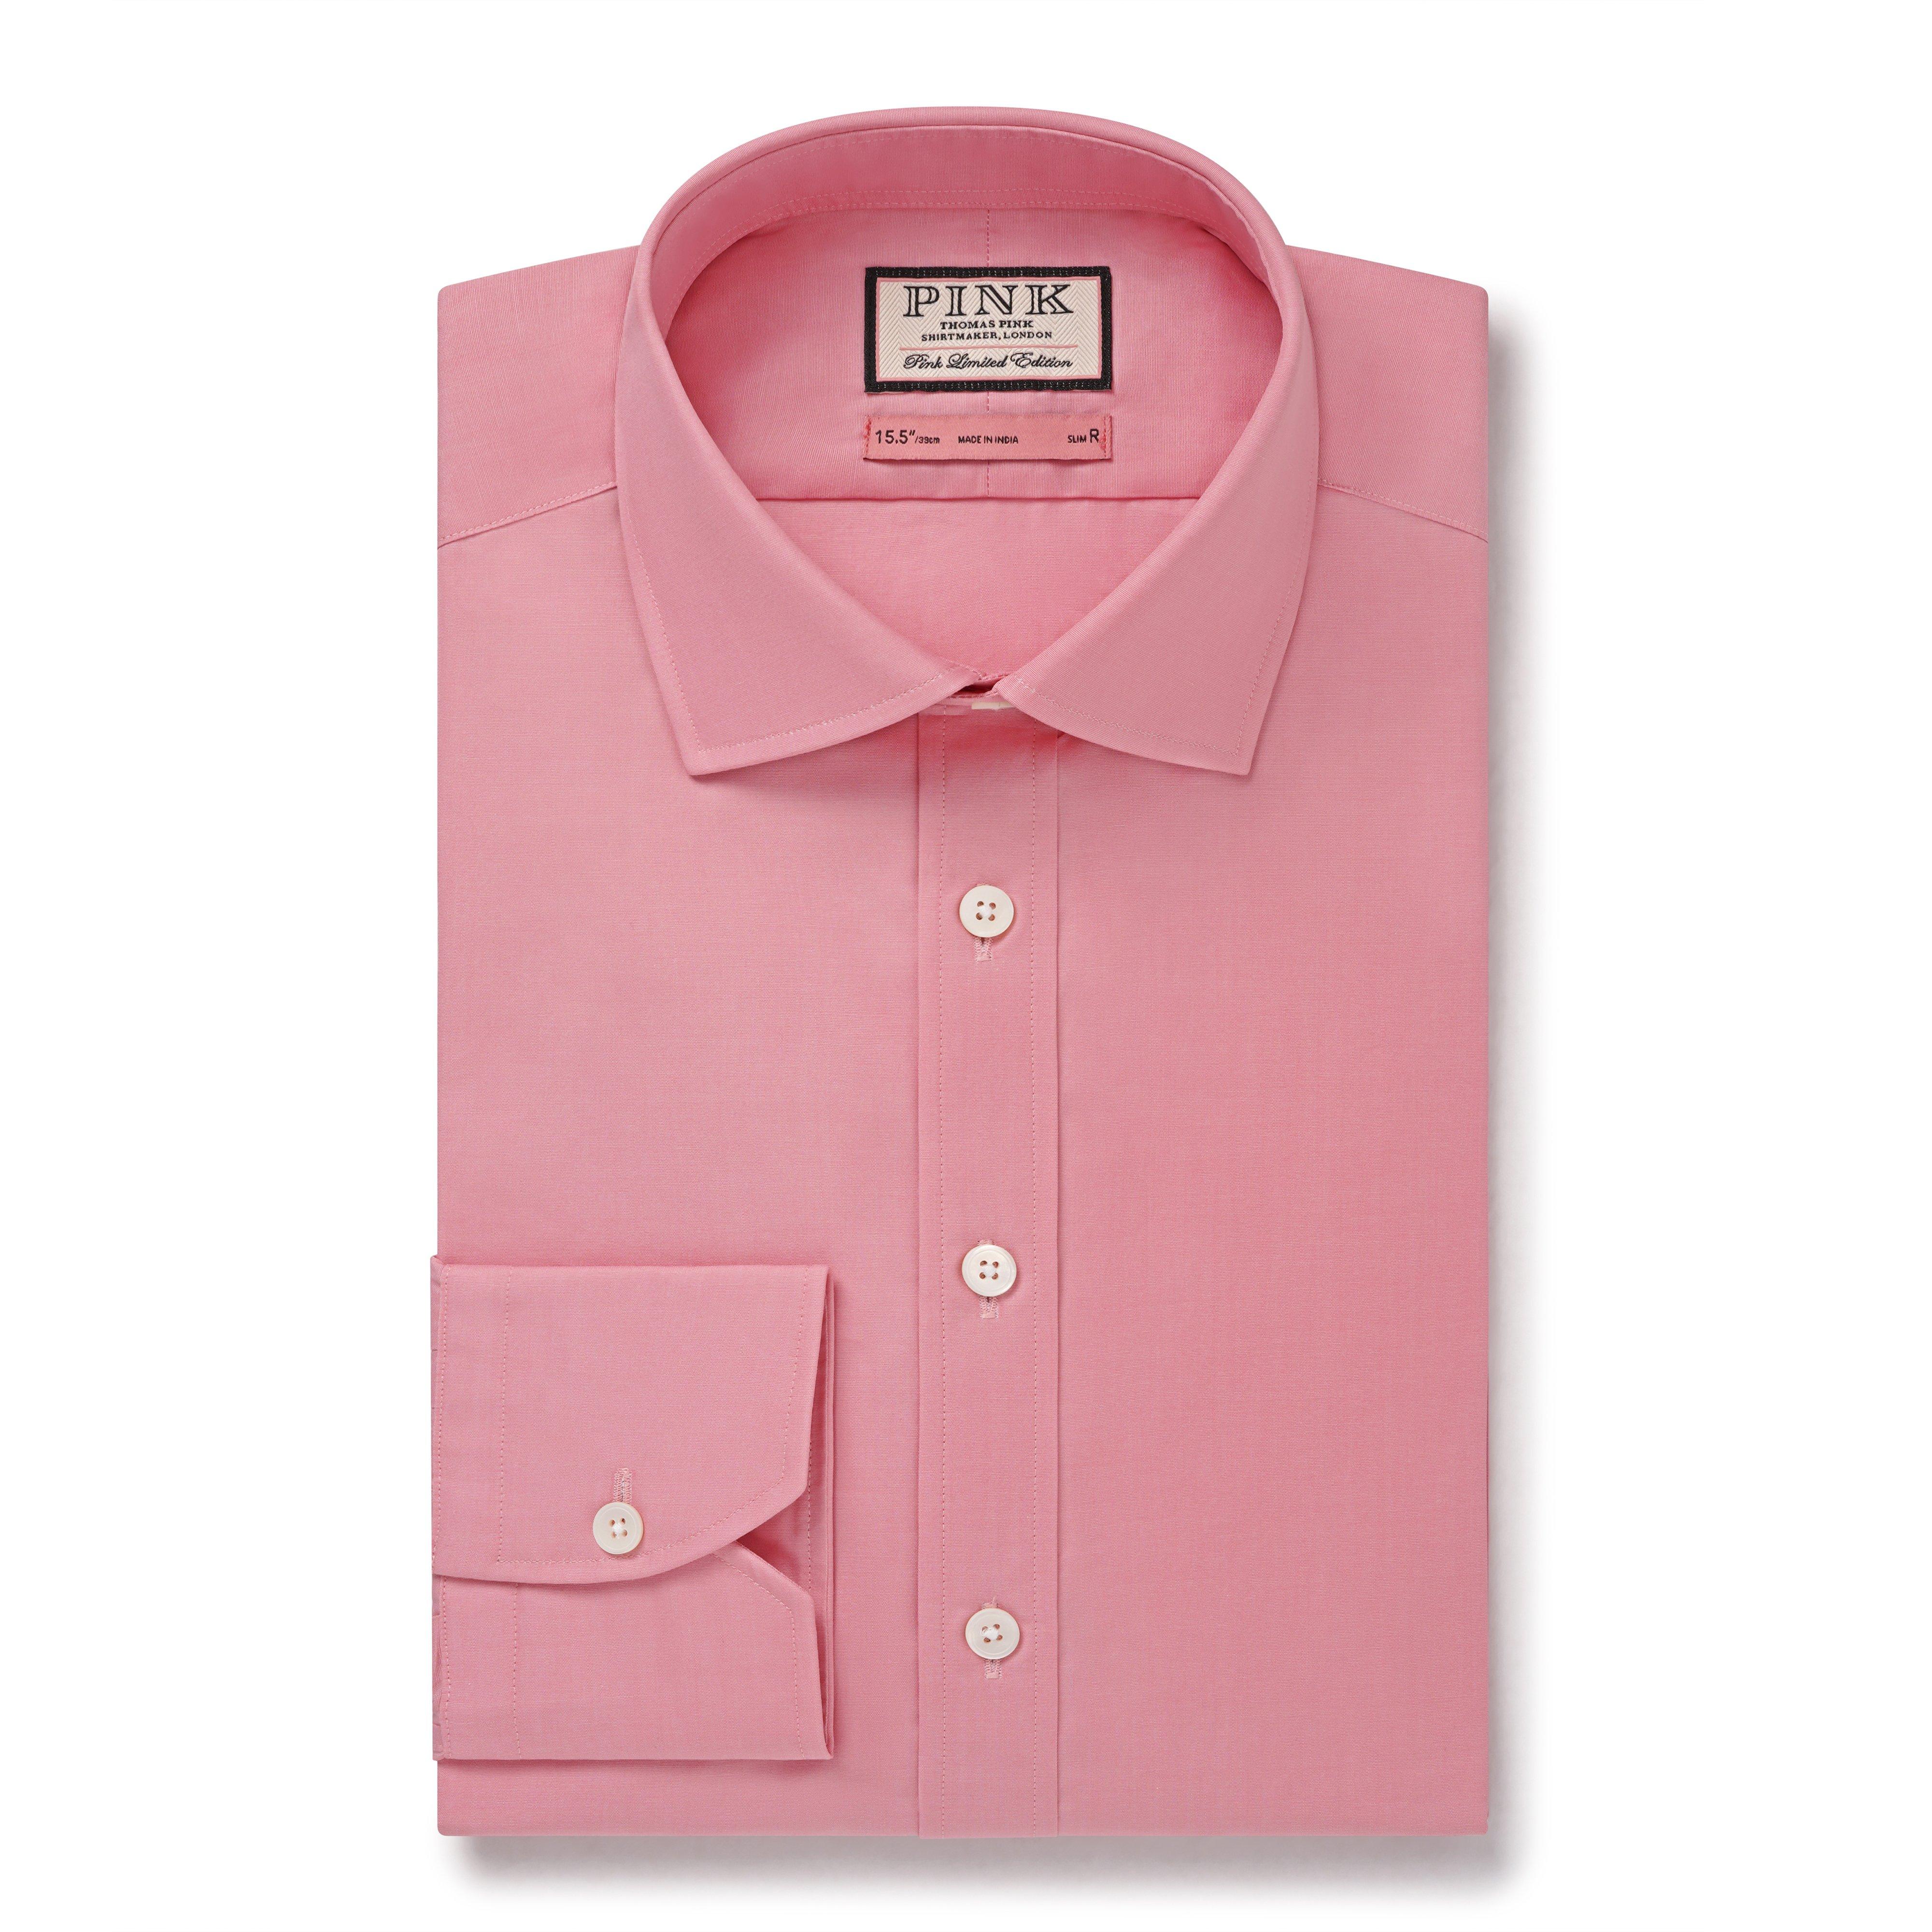 Thomas Pink Button-Front Shirt Limited Edition 2012 Roses